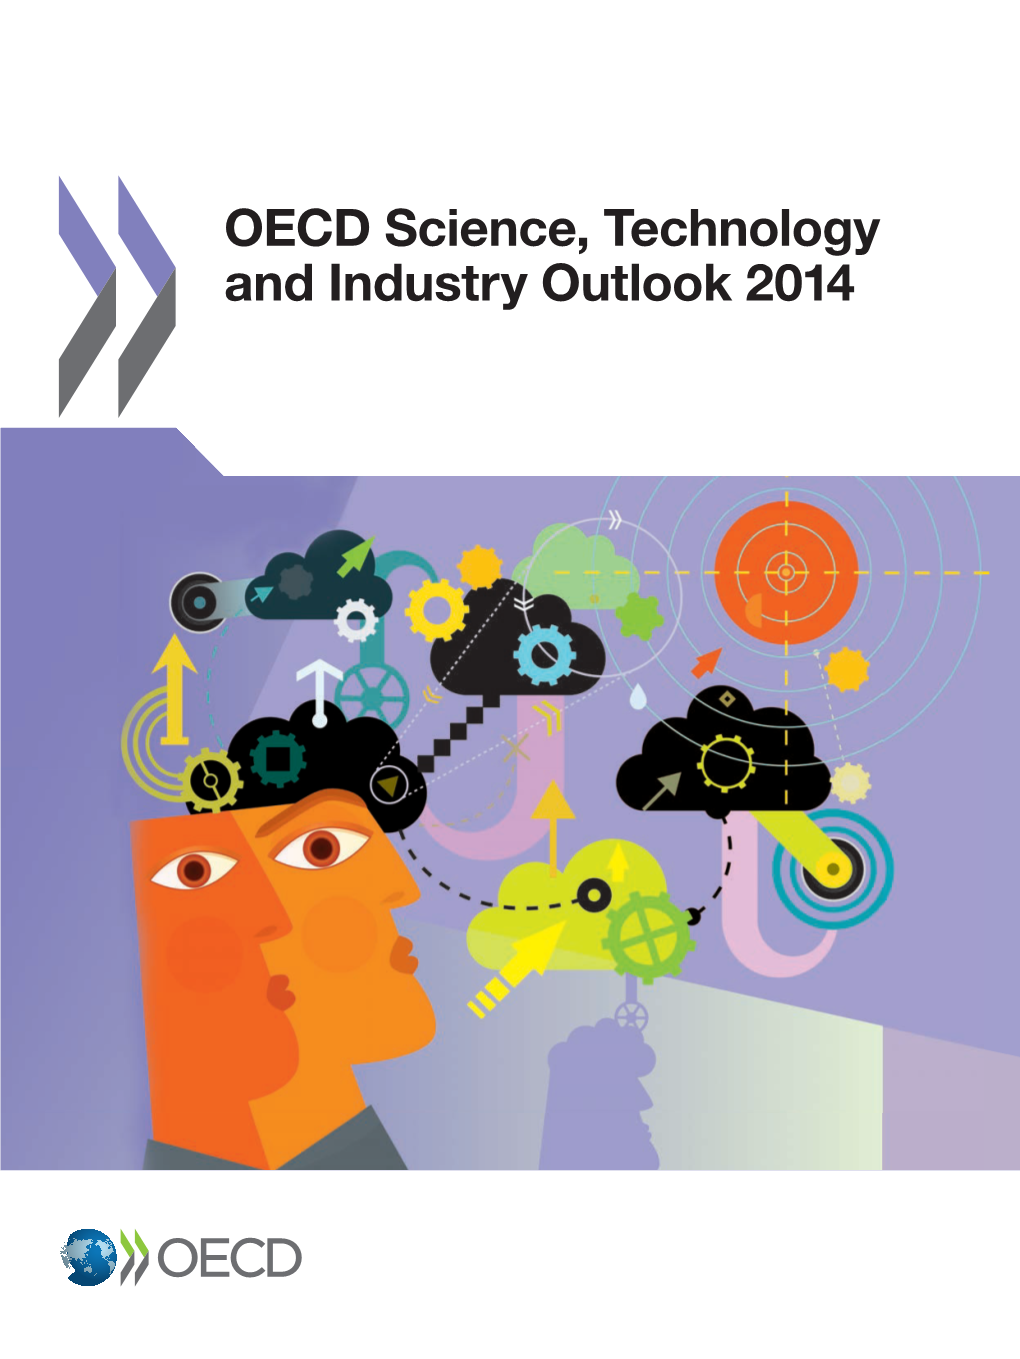 OECD Science, Technology and Industry Outlook 2014